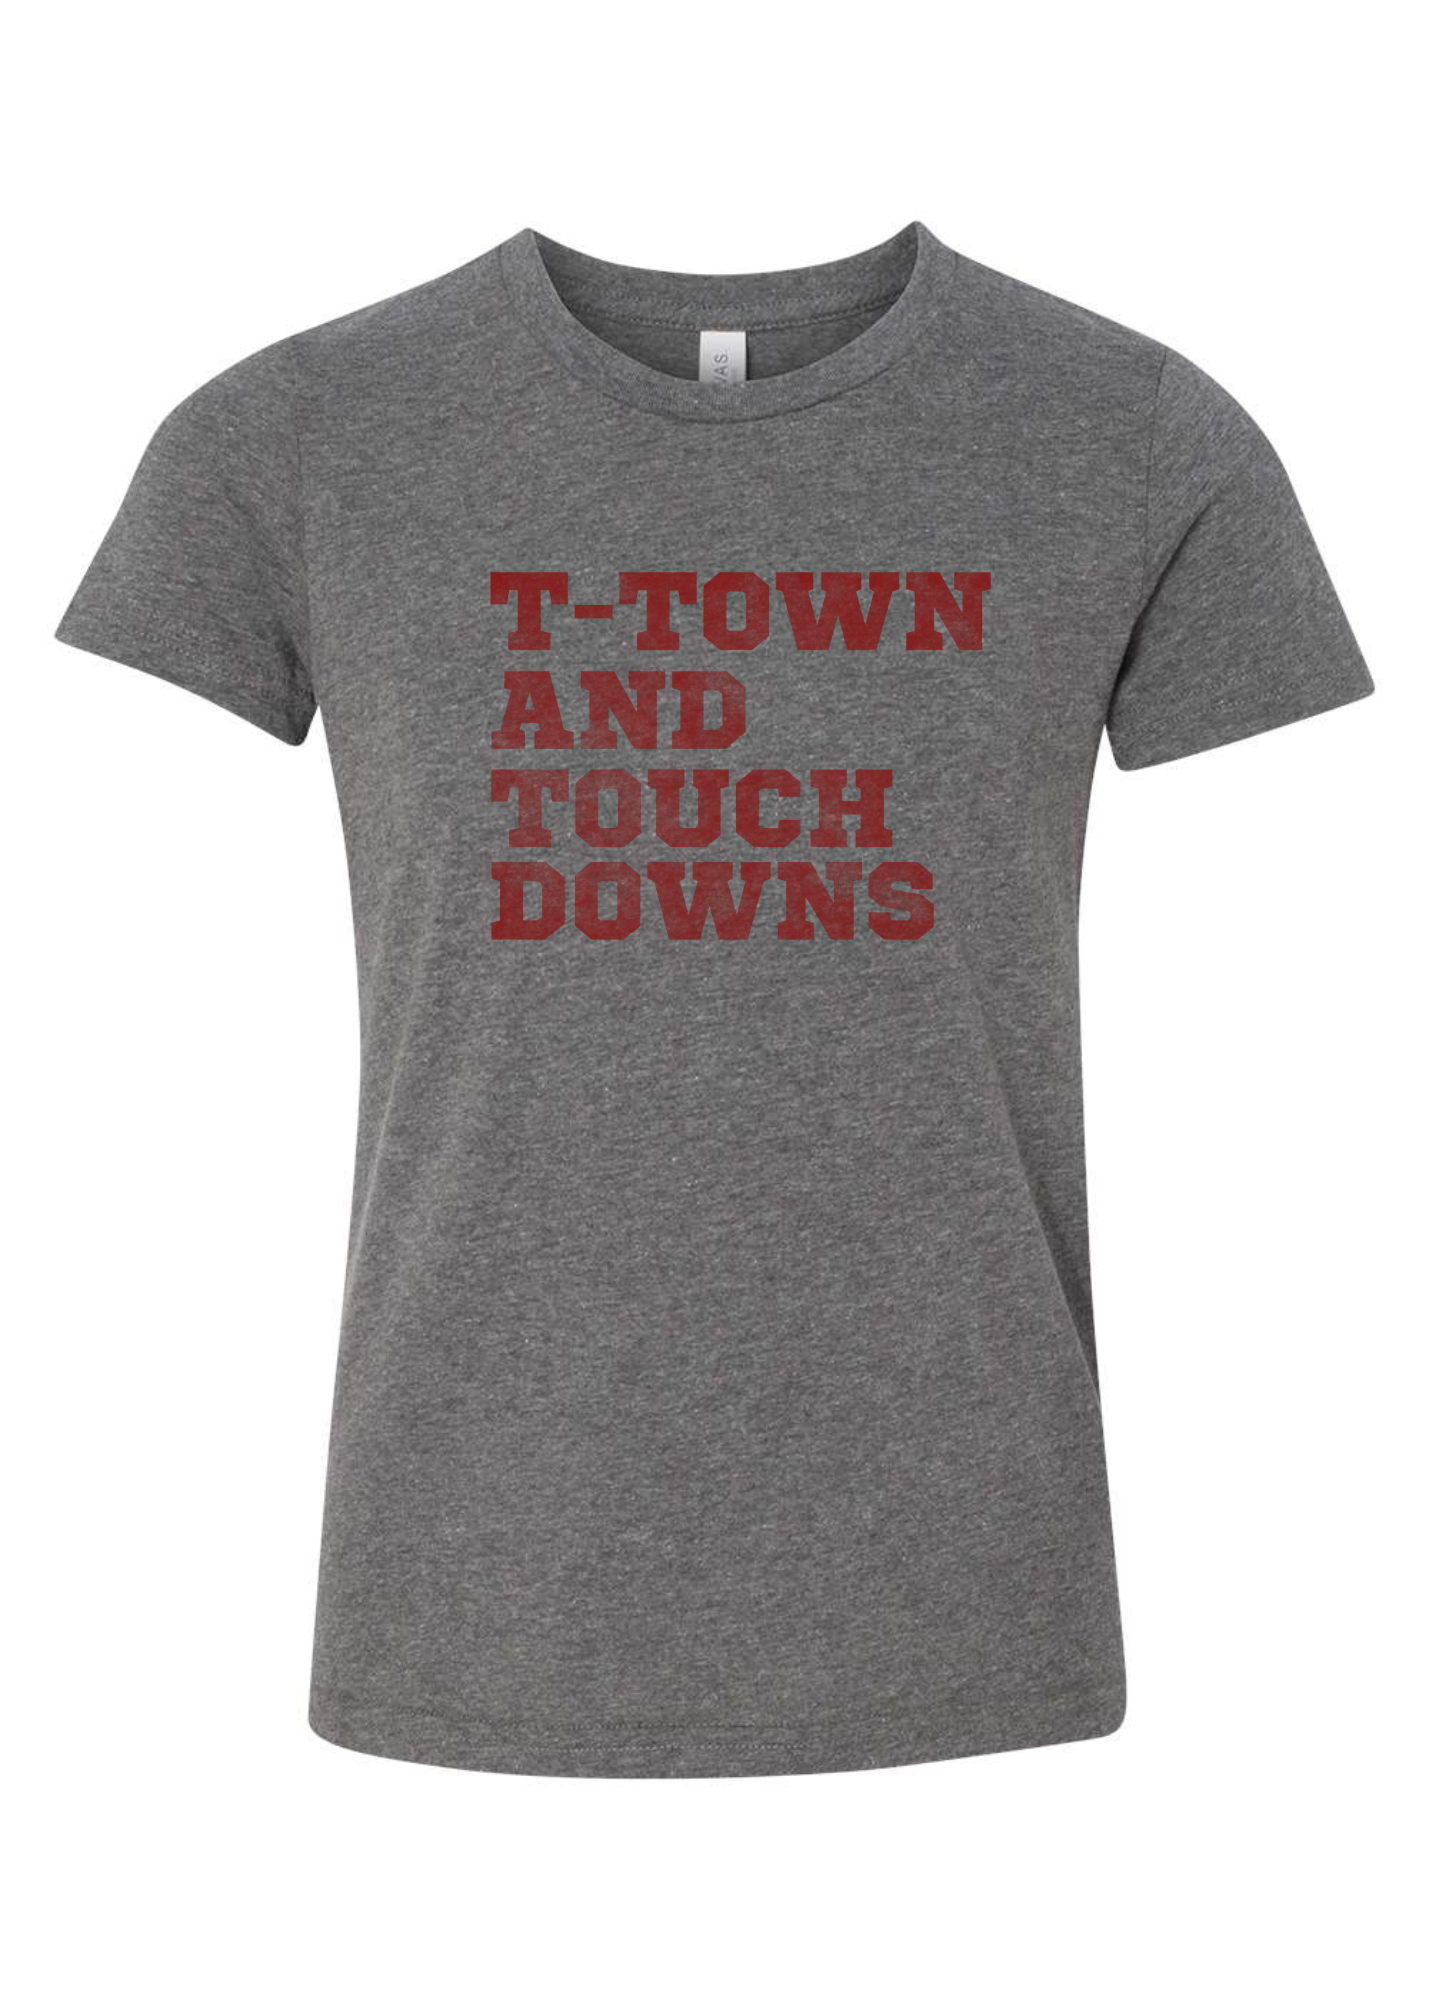 T-Town and Touchdowns | Kids Tee-Kids Tees-Sister Shirts-Sister Shirts, Cute & Custom Tees for Mama & Littles in Trussville, Alabama.